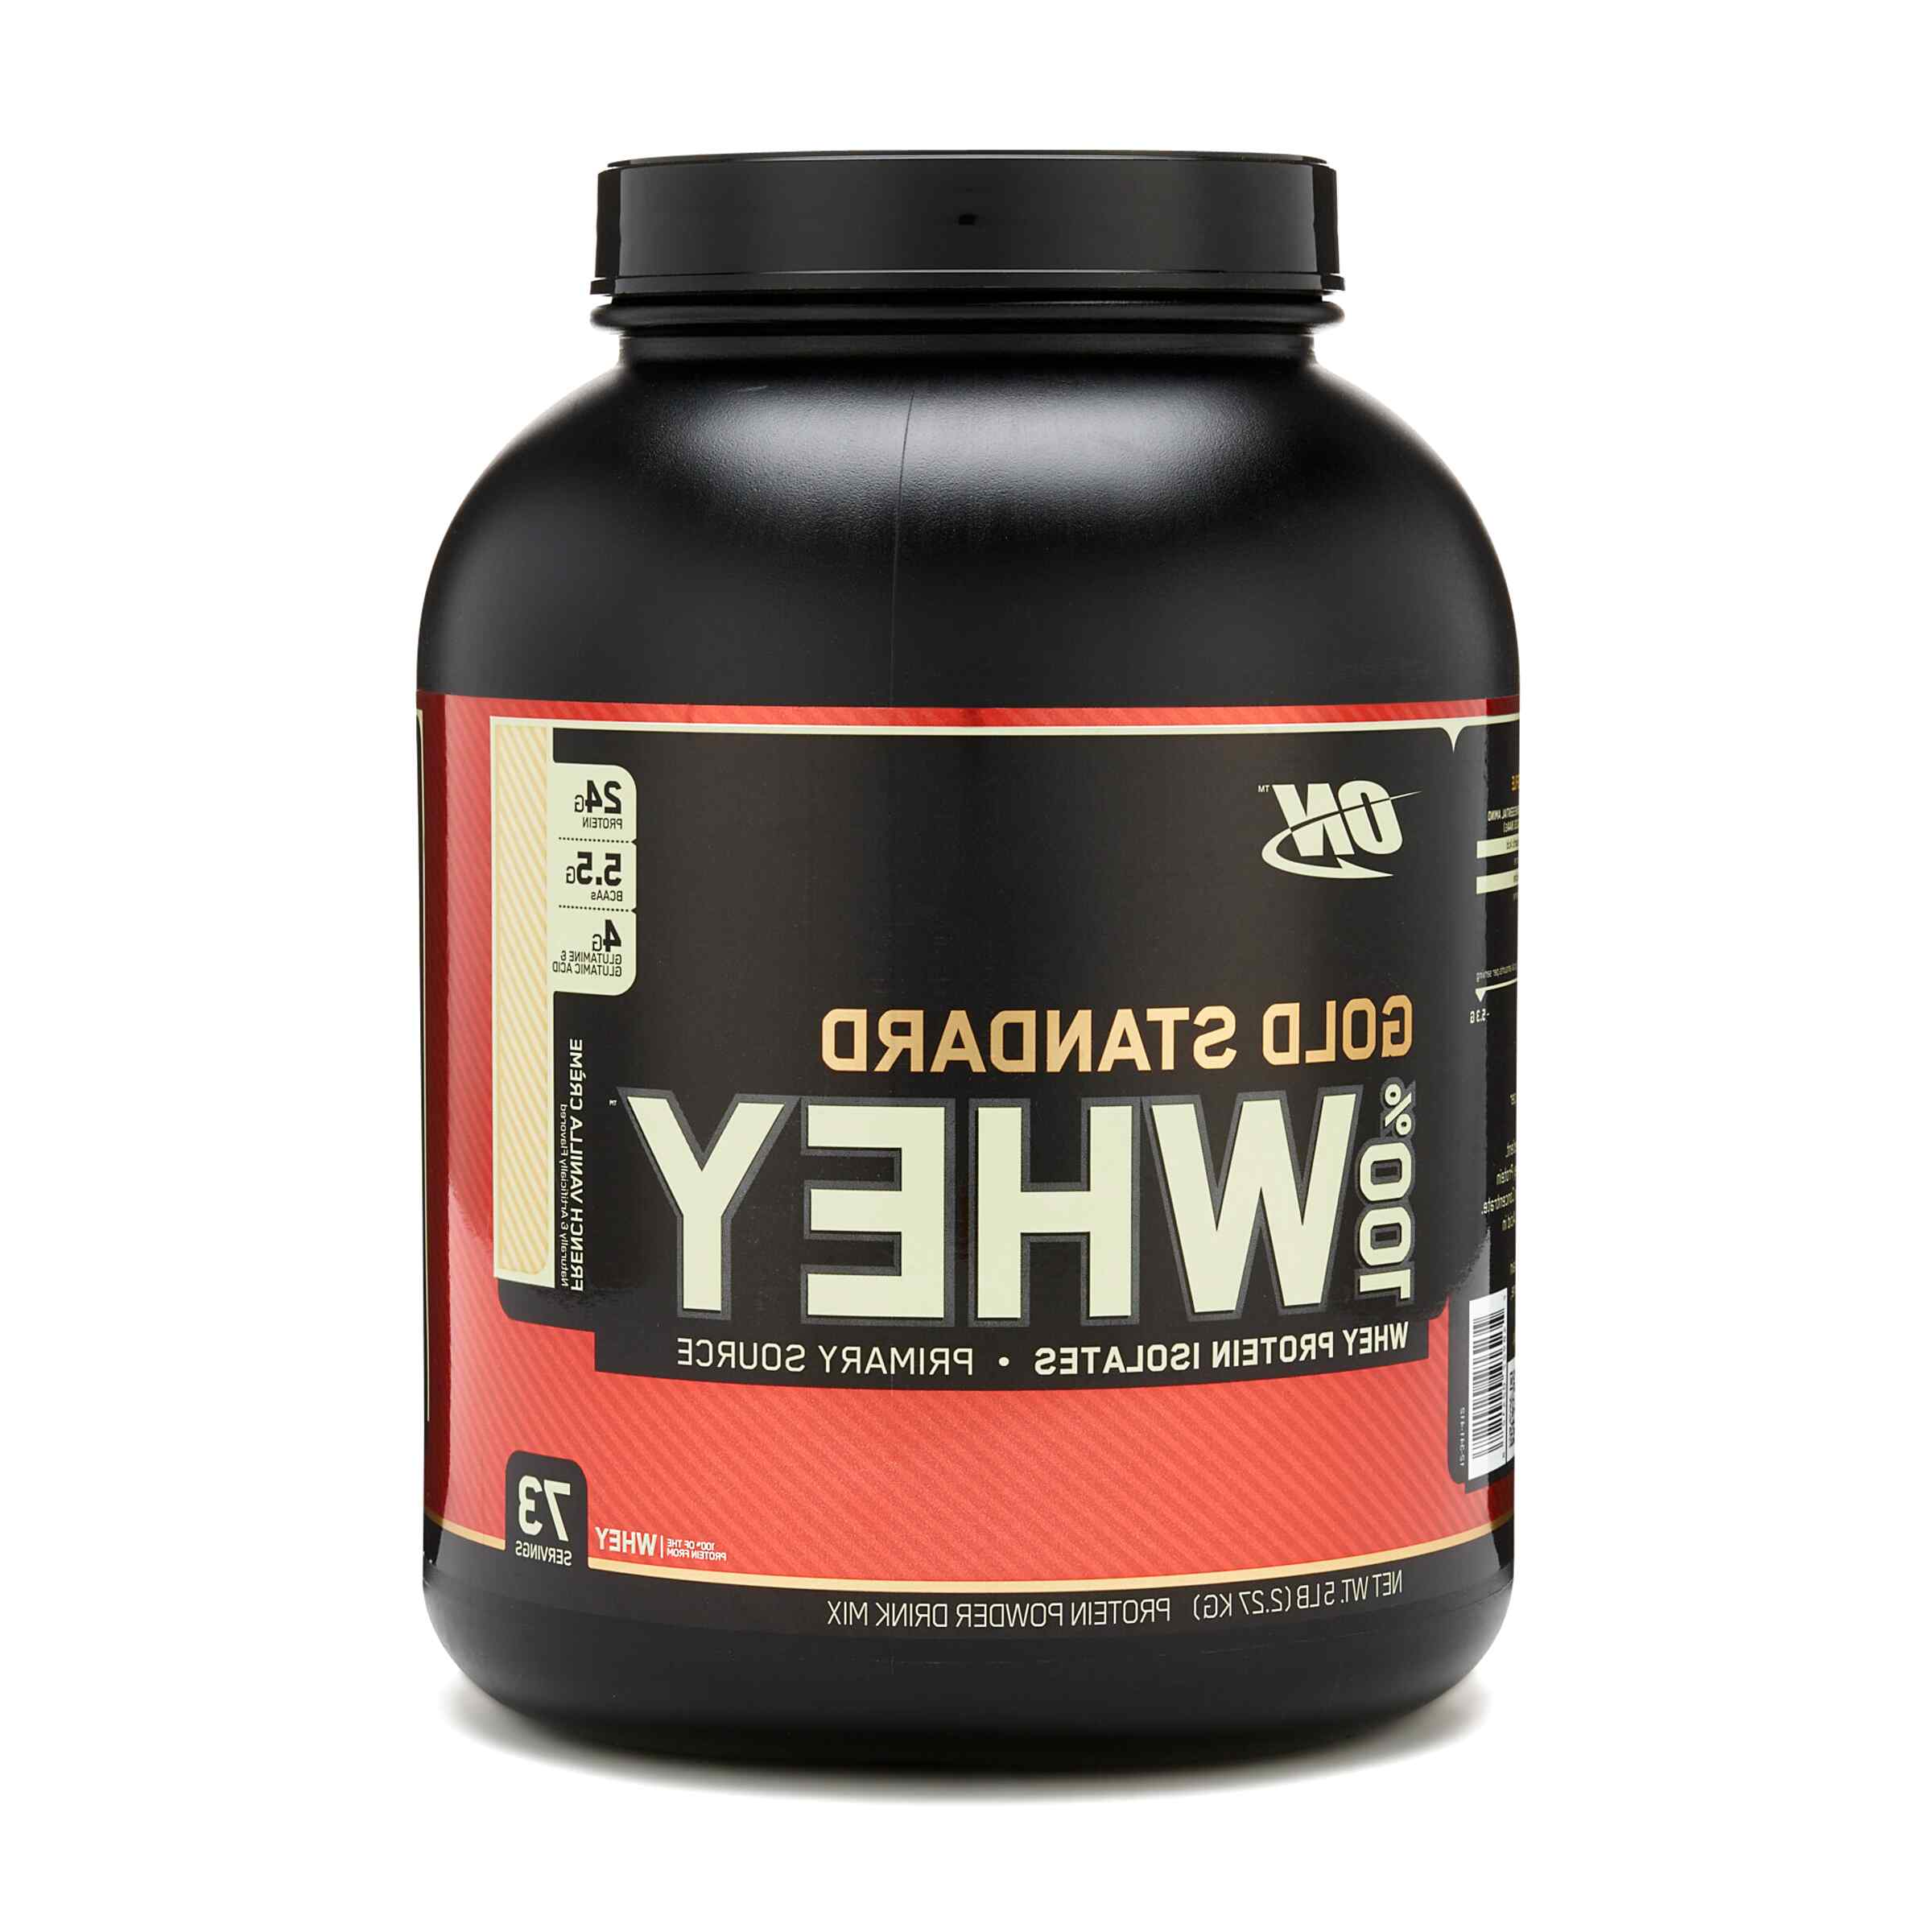 Whey Protein Powder for sale in UK | 40 used Whey Protein Powders